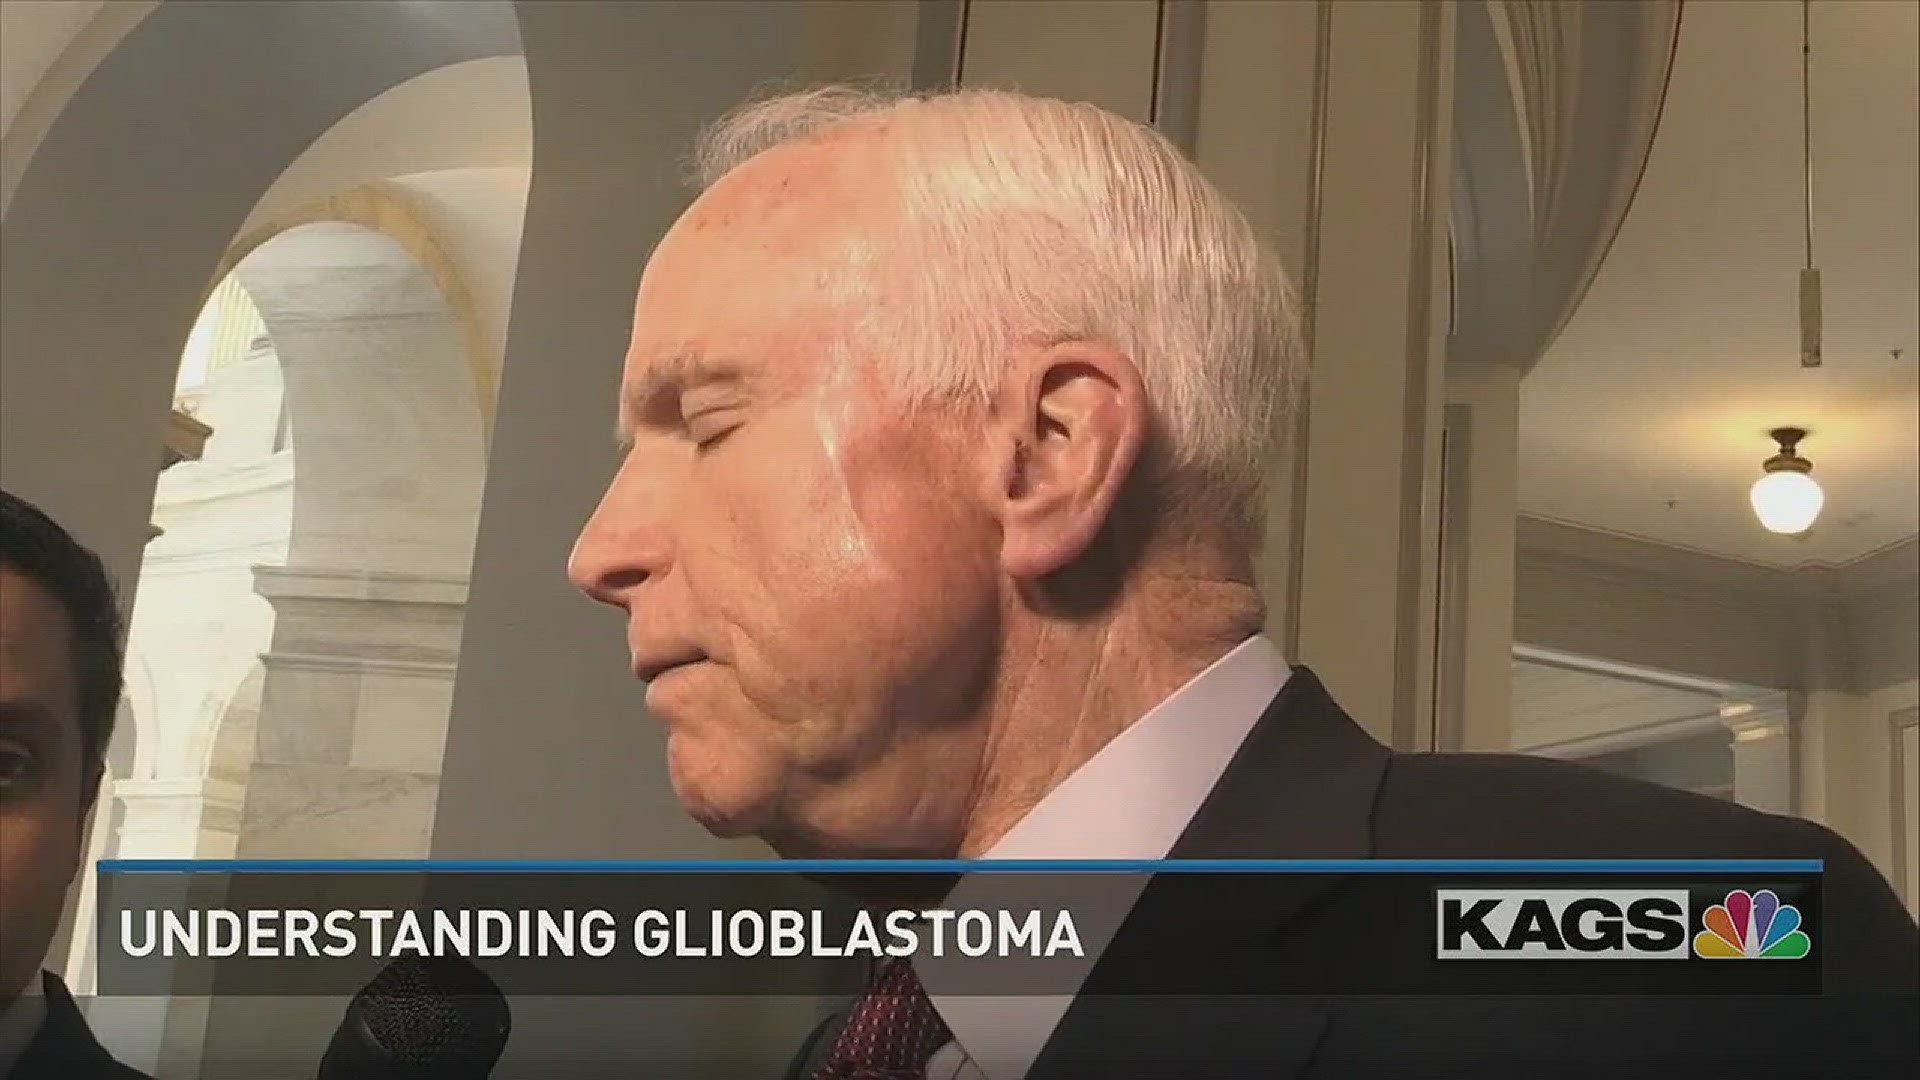 Senator John McCain has been diagnosed glioblastoma. We learn more about this type of cancer.